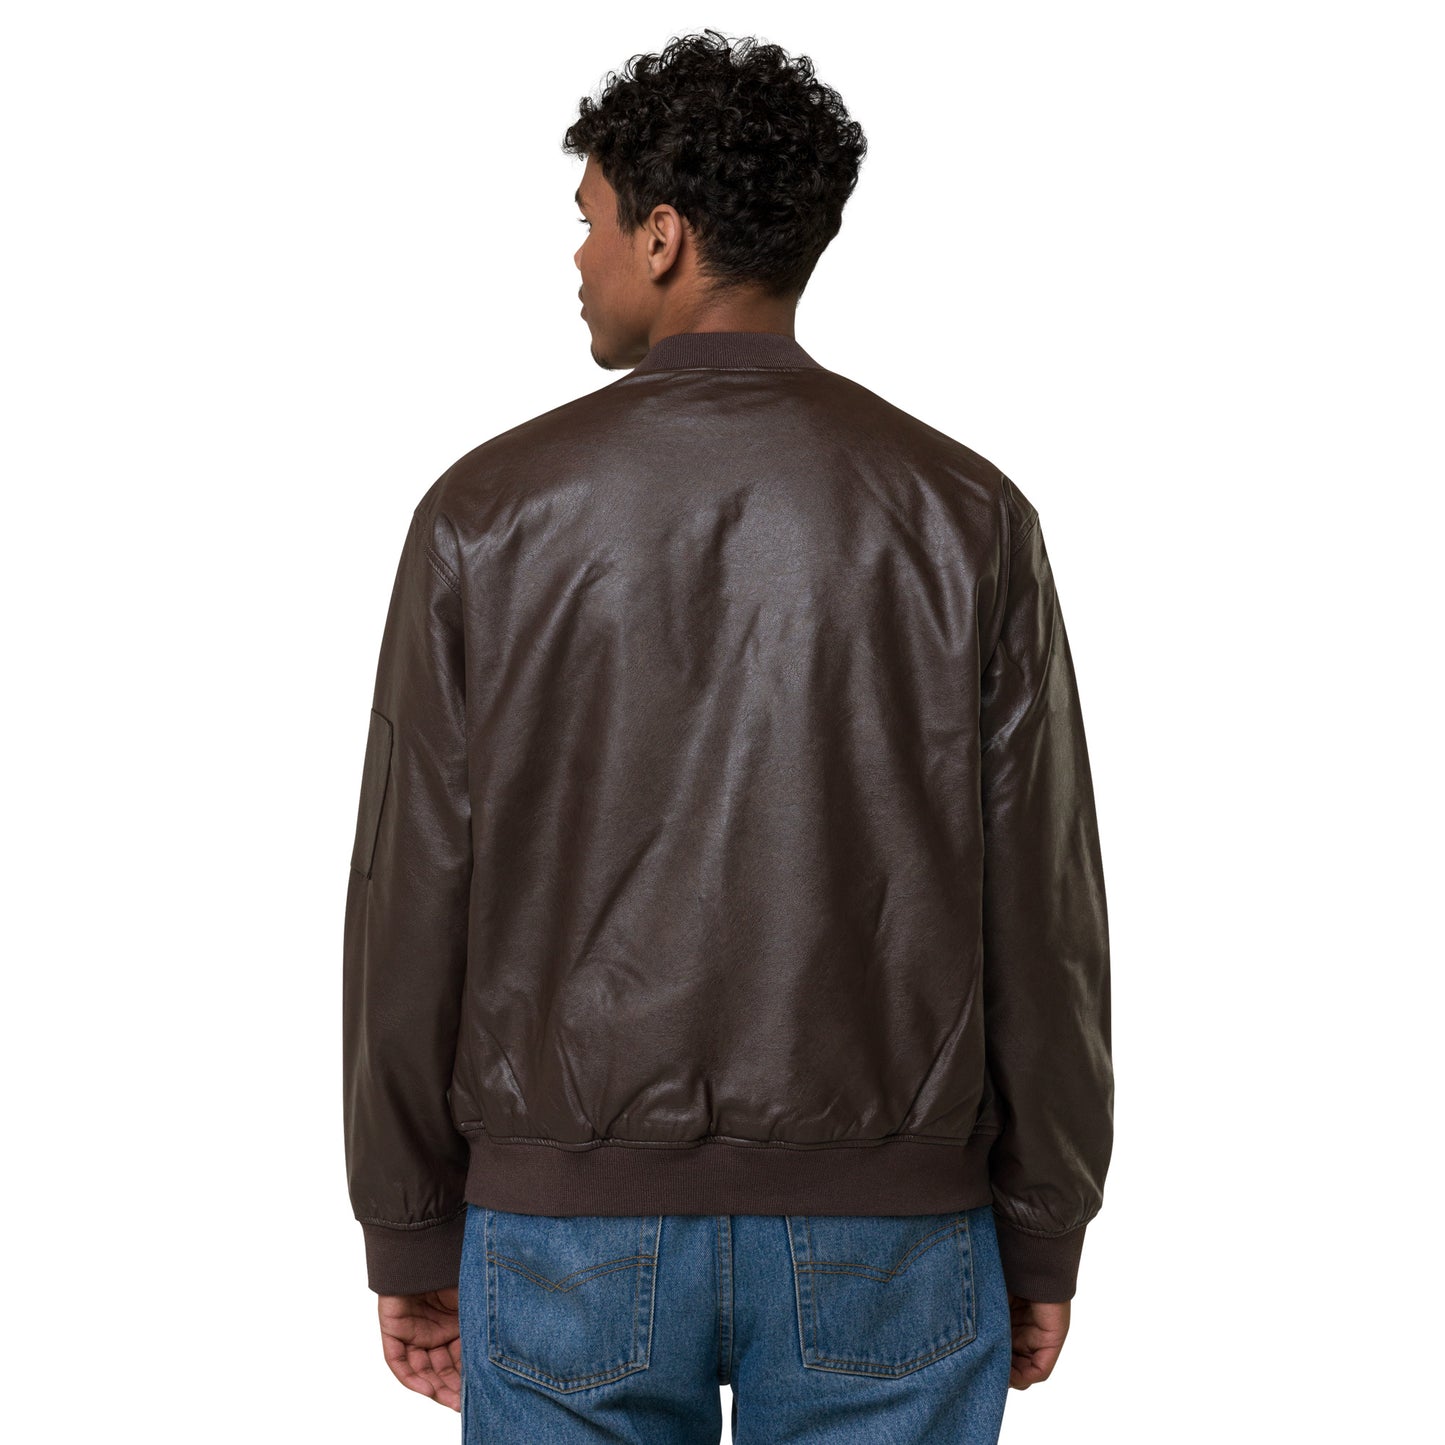 DOPiFiED Leather Bomber Jacket